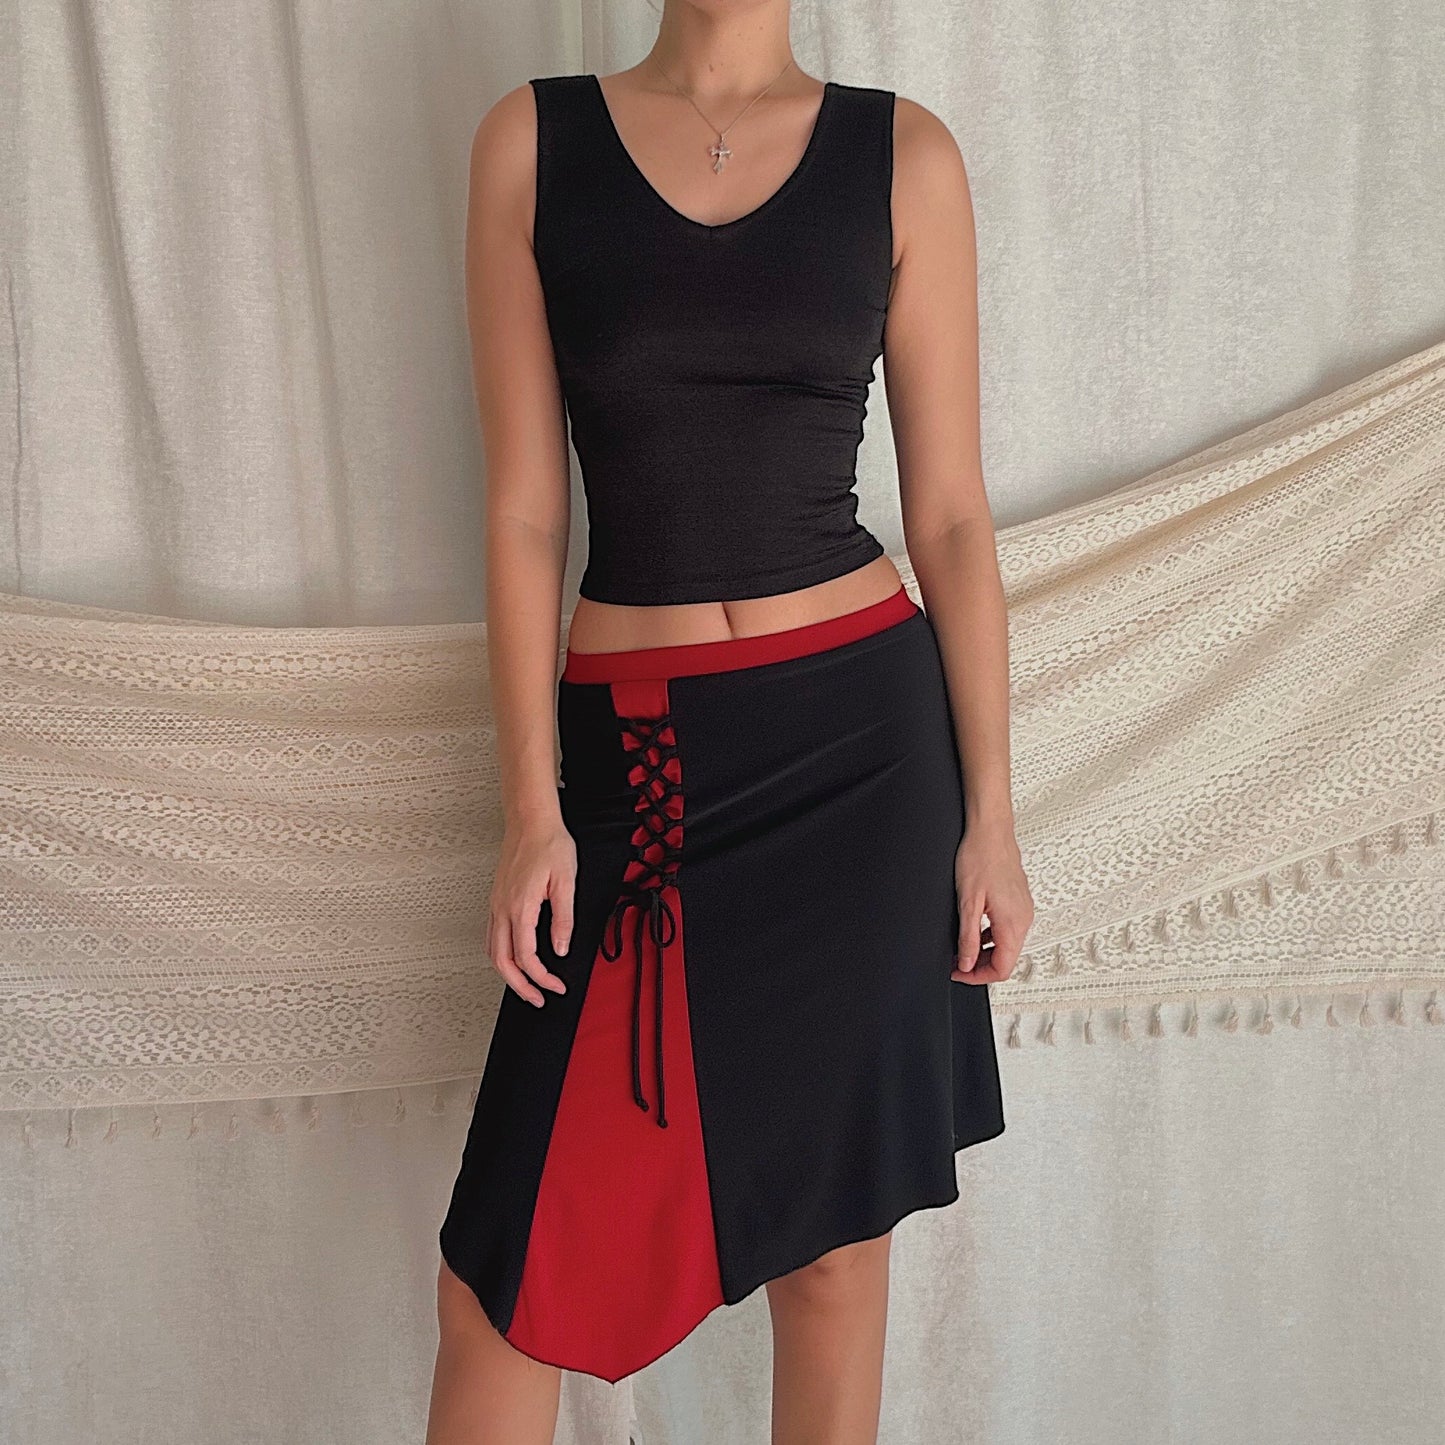 Y2K Black & Red Lace Up Midi Skirt / SZ S